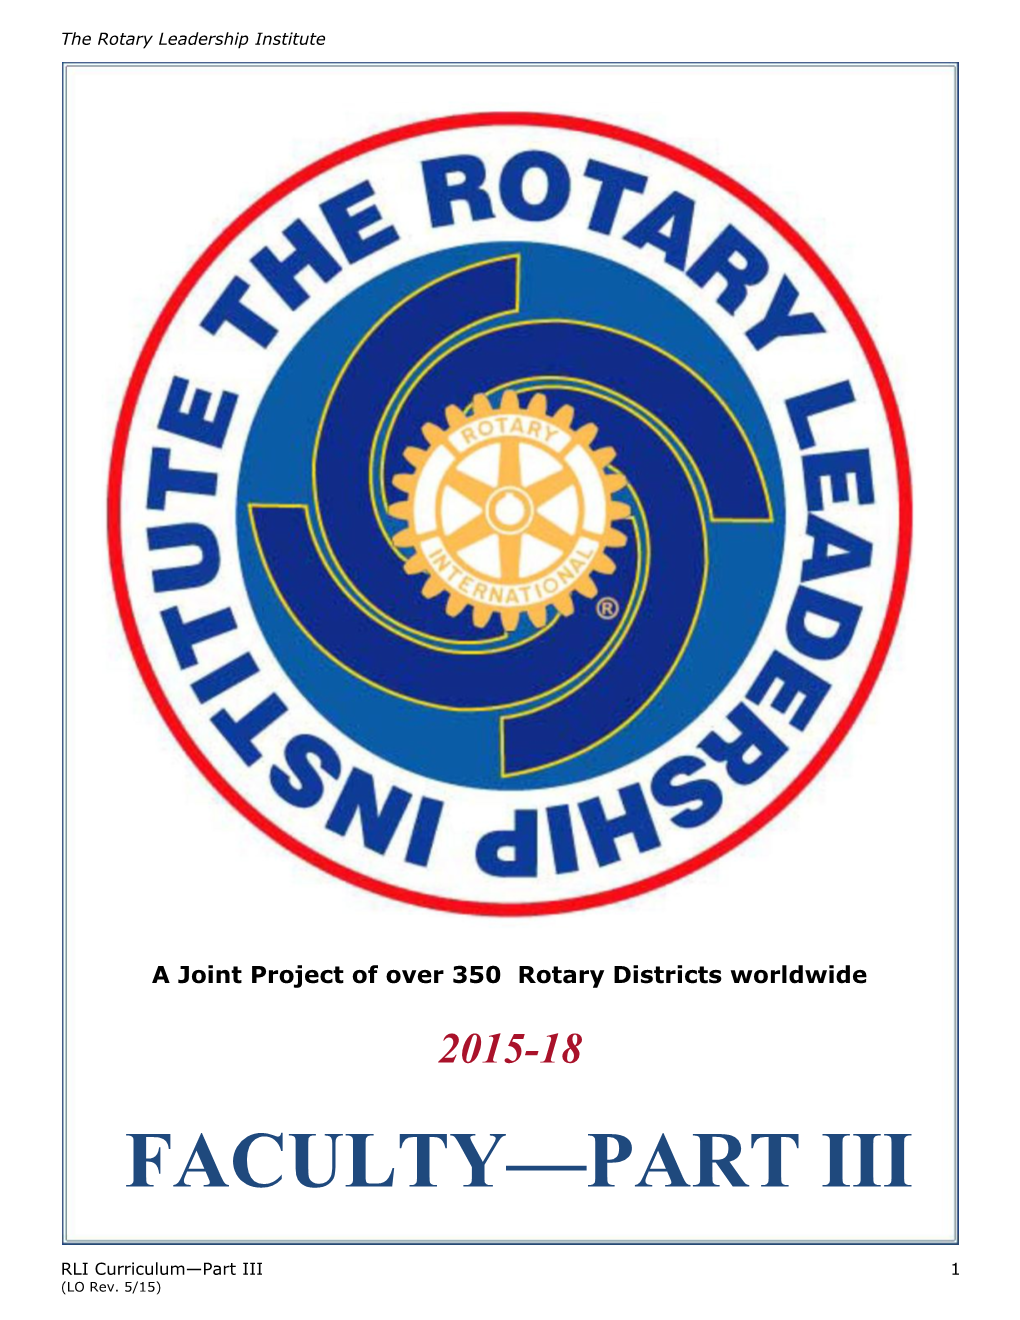 A Joint Project of Over 350 Rotary Districts Worldwide